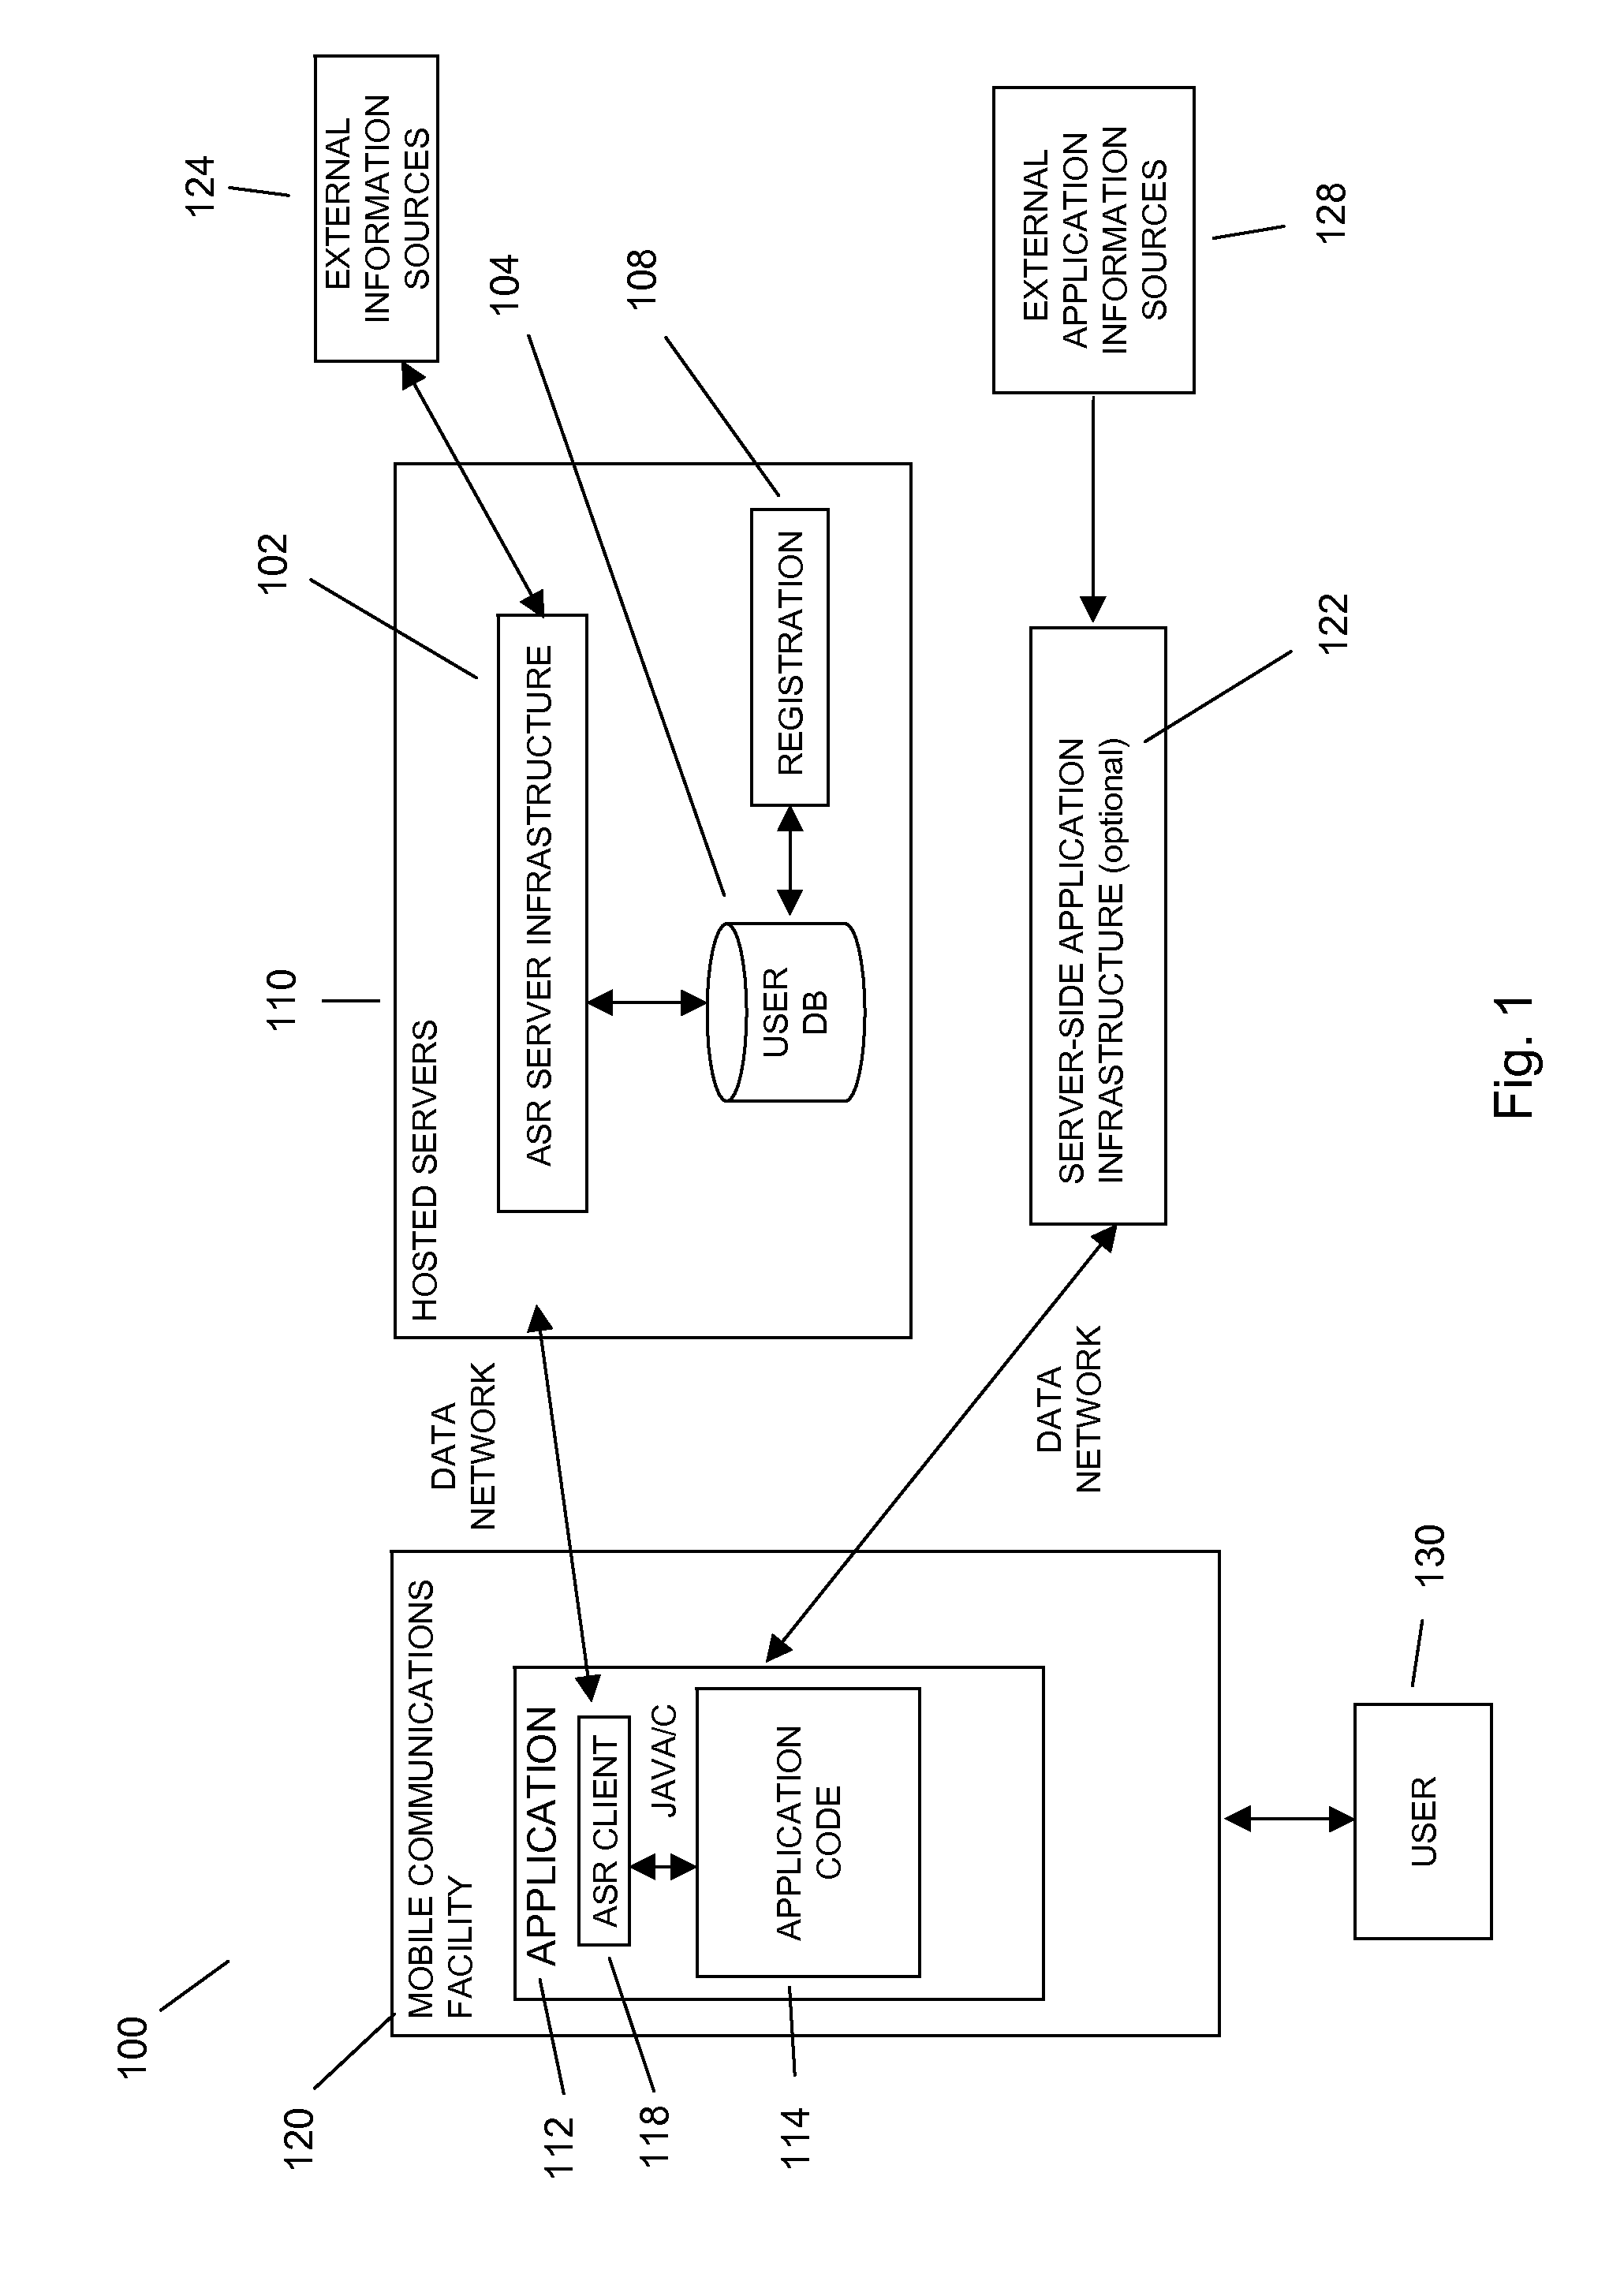 Sending a communications header with voice recording to send metadata for use in speech recognition, formatting, and search mobile search application